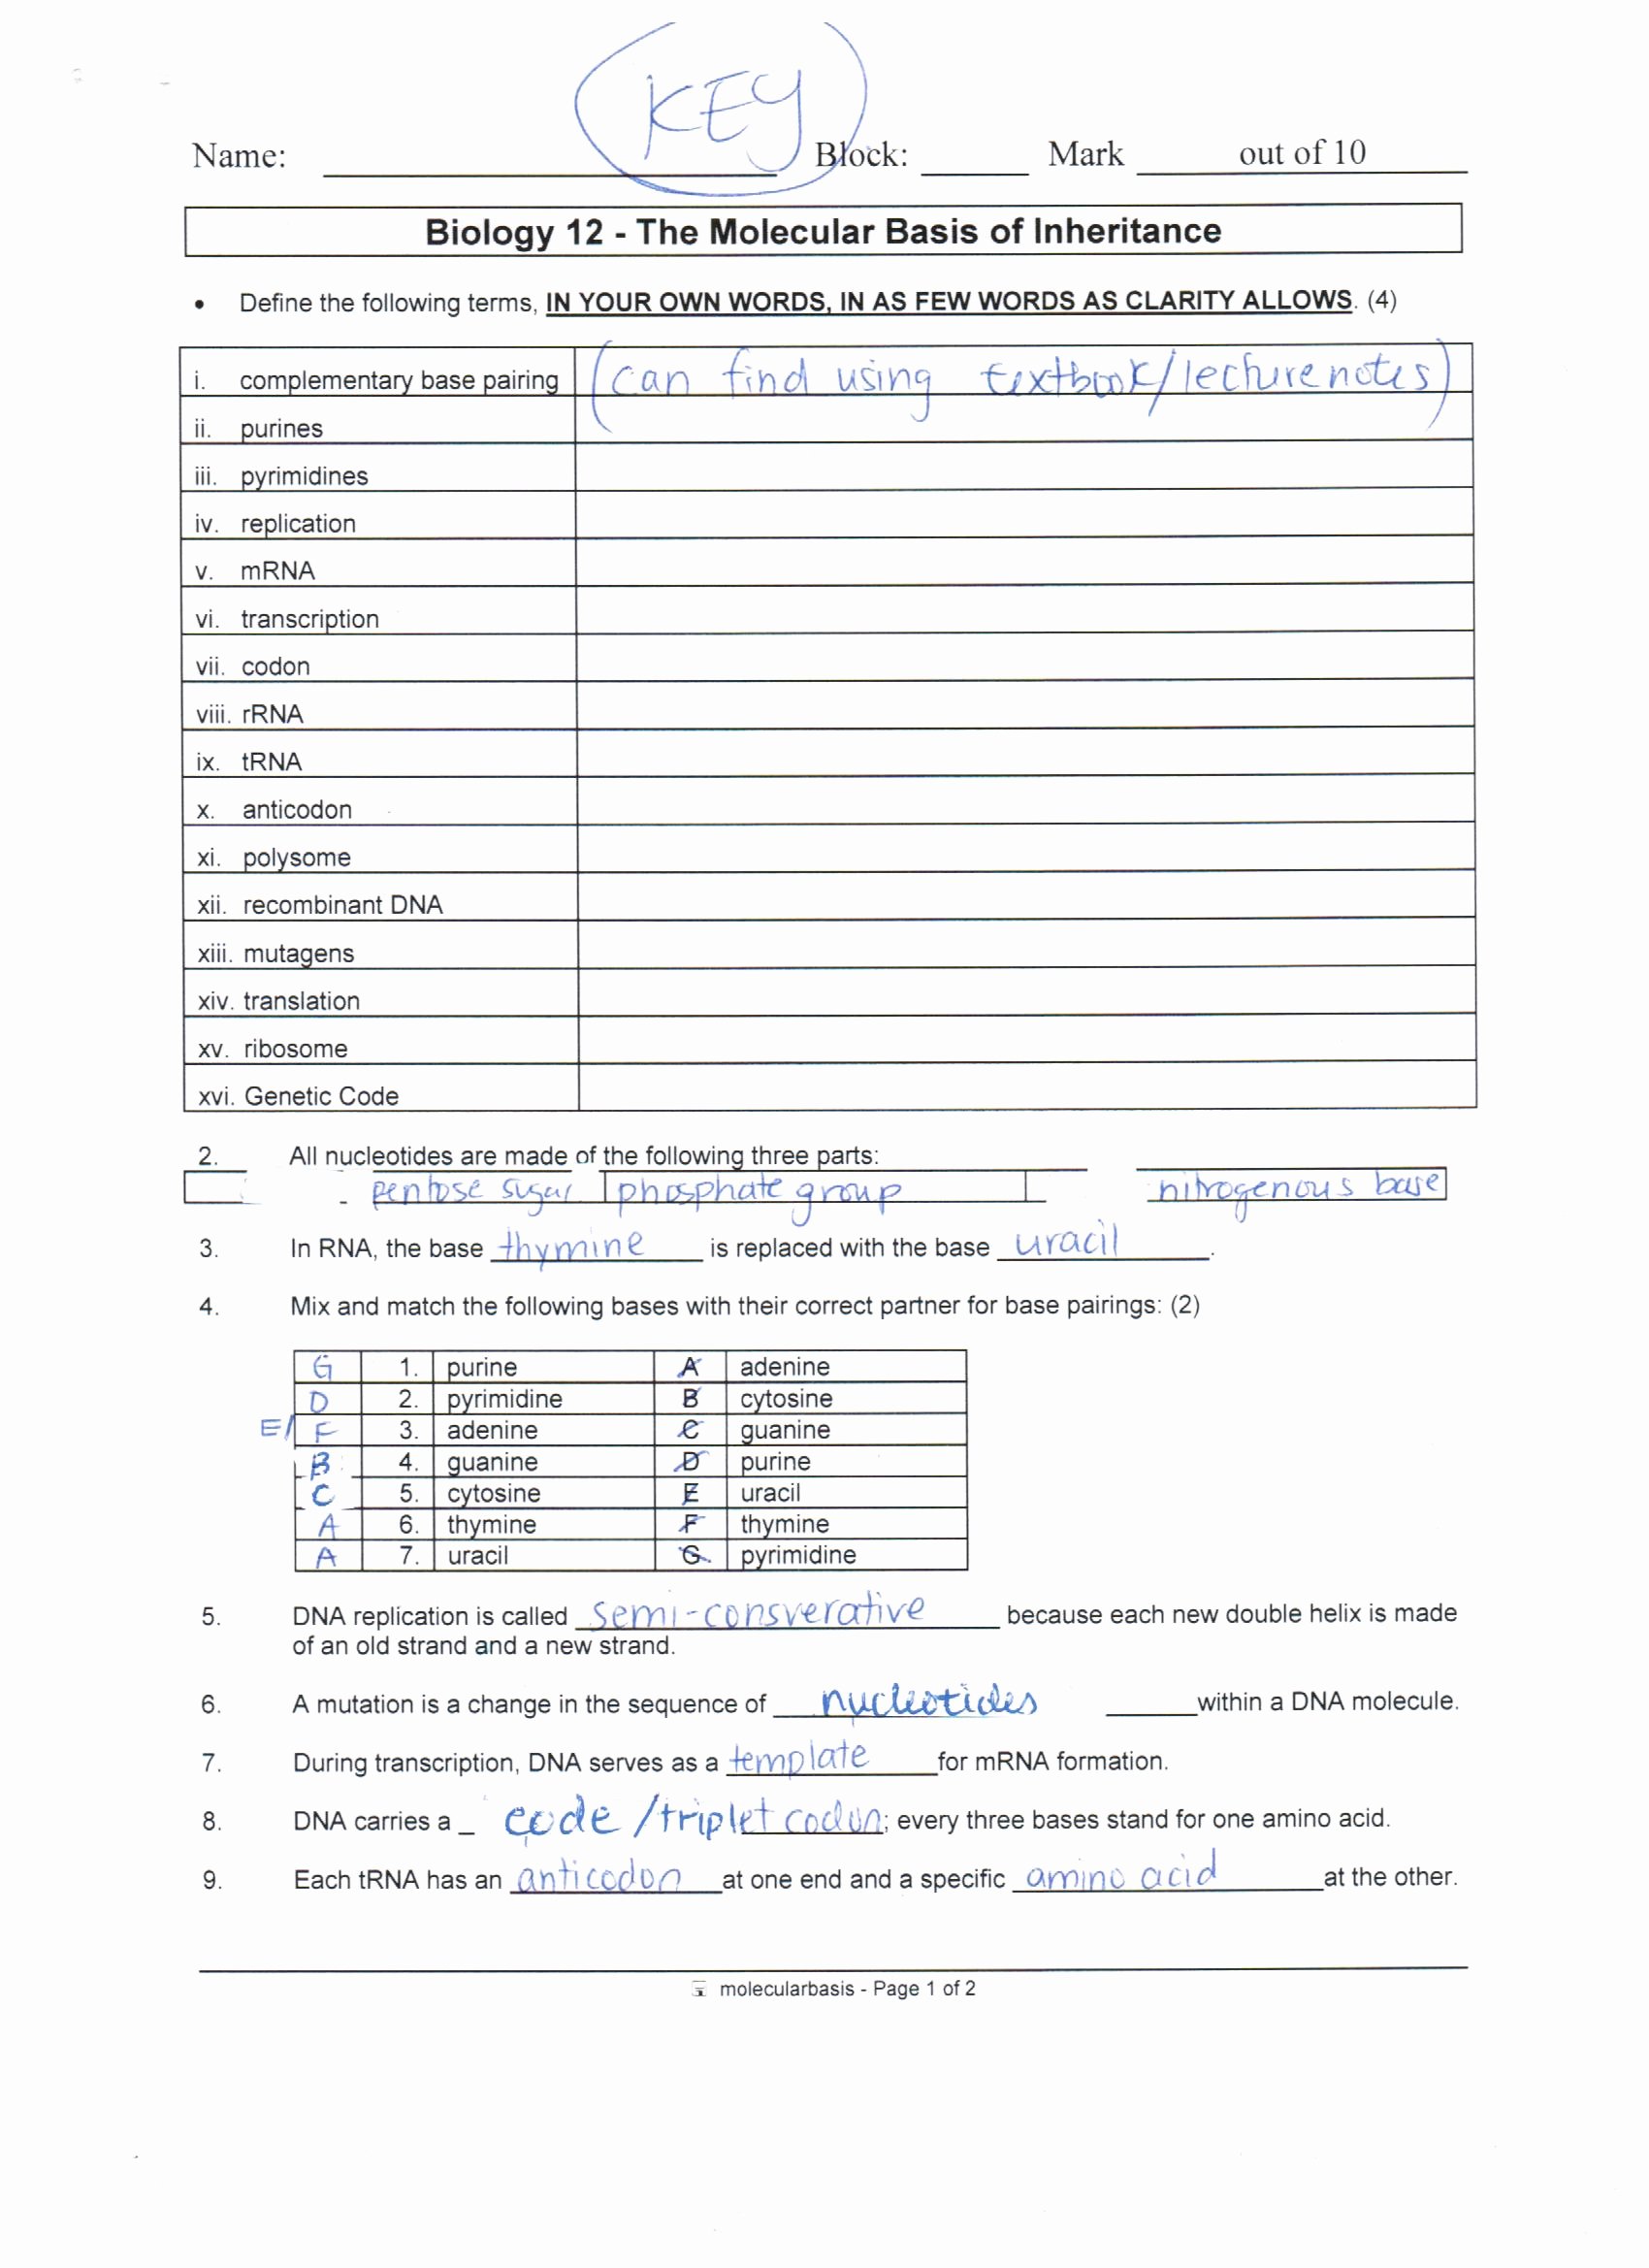 Protein Synthesis Worksheet Answers Luxury Answer Key Dna Protein Synthesis and Mutations Review